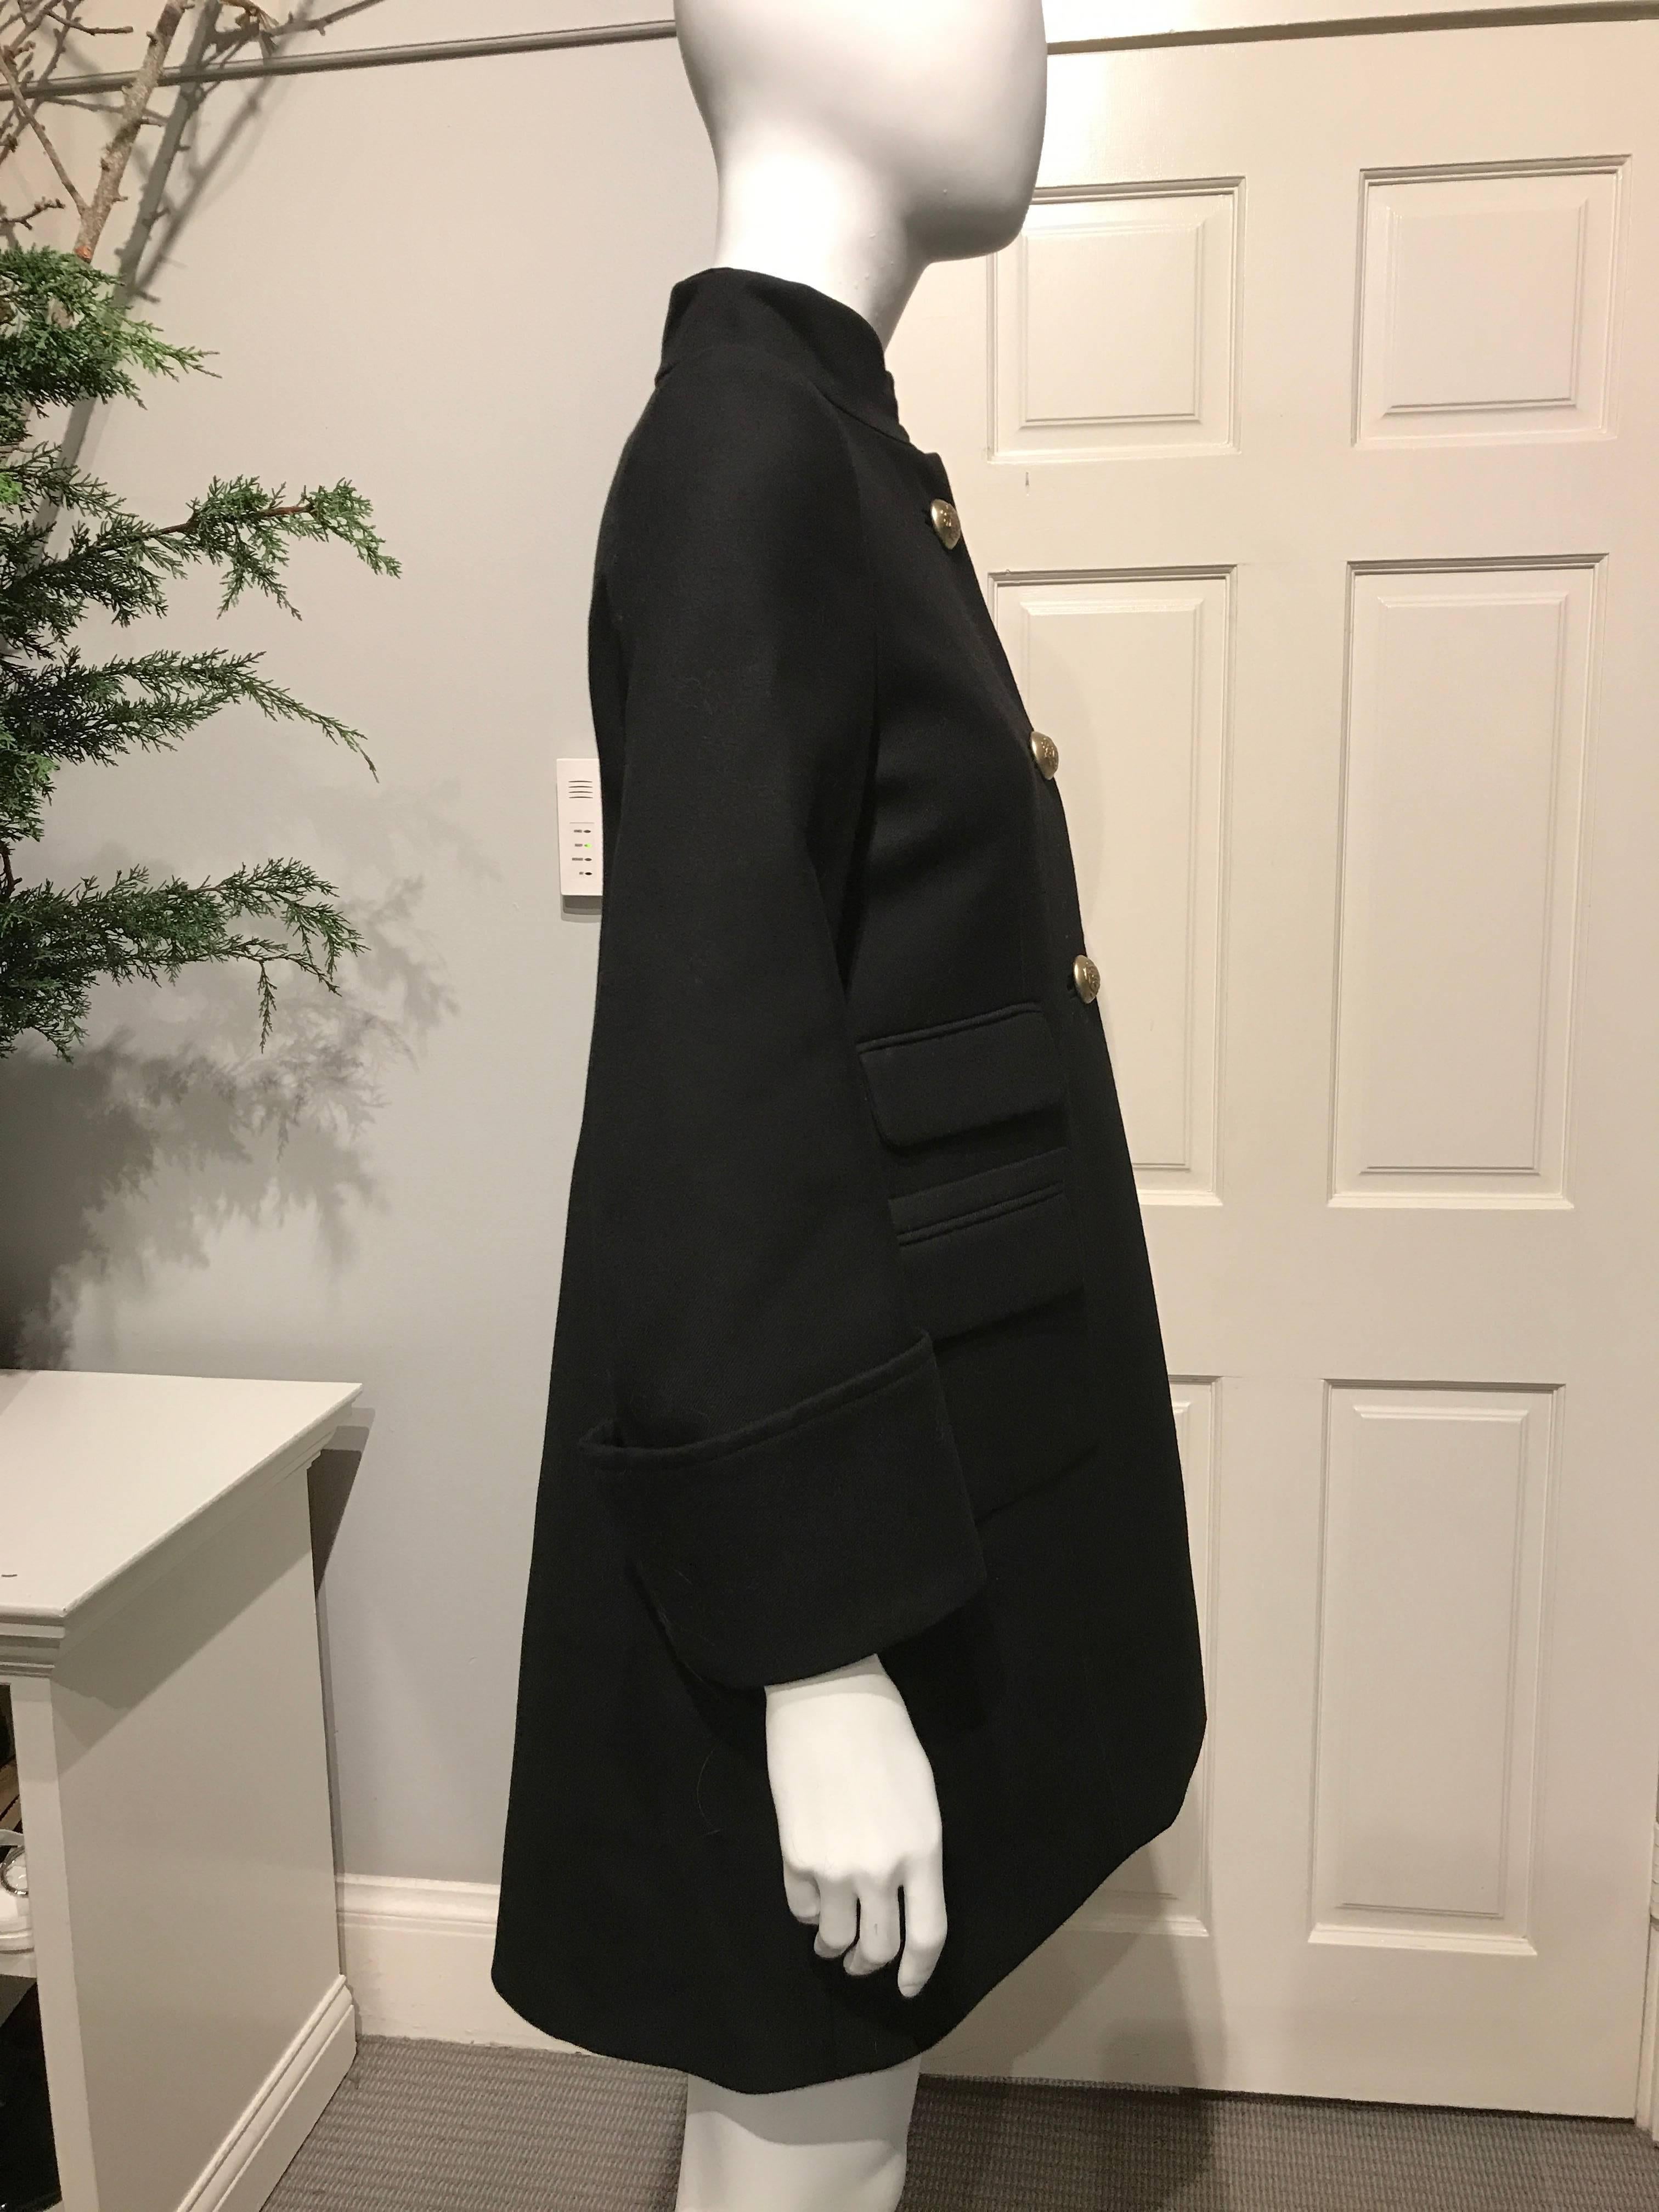 Balenciaga Black Coat With Asian Letters On Breast Pocket For Sale 3